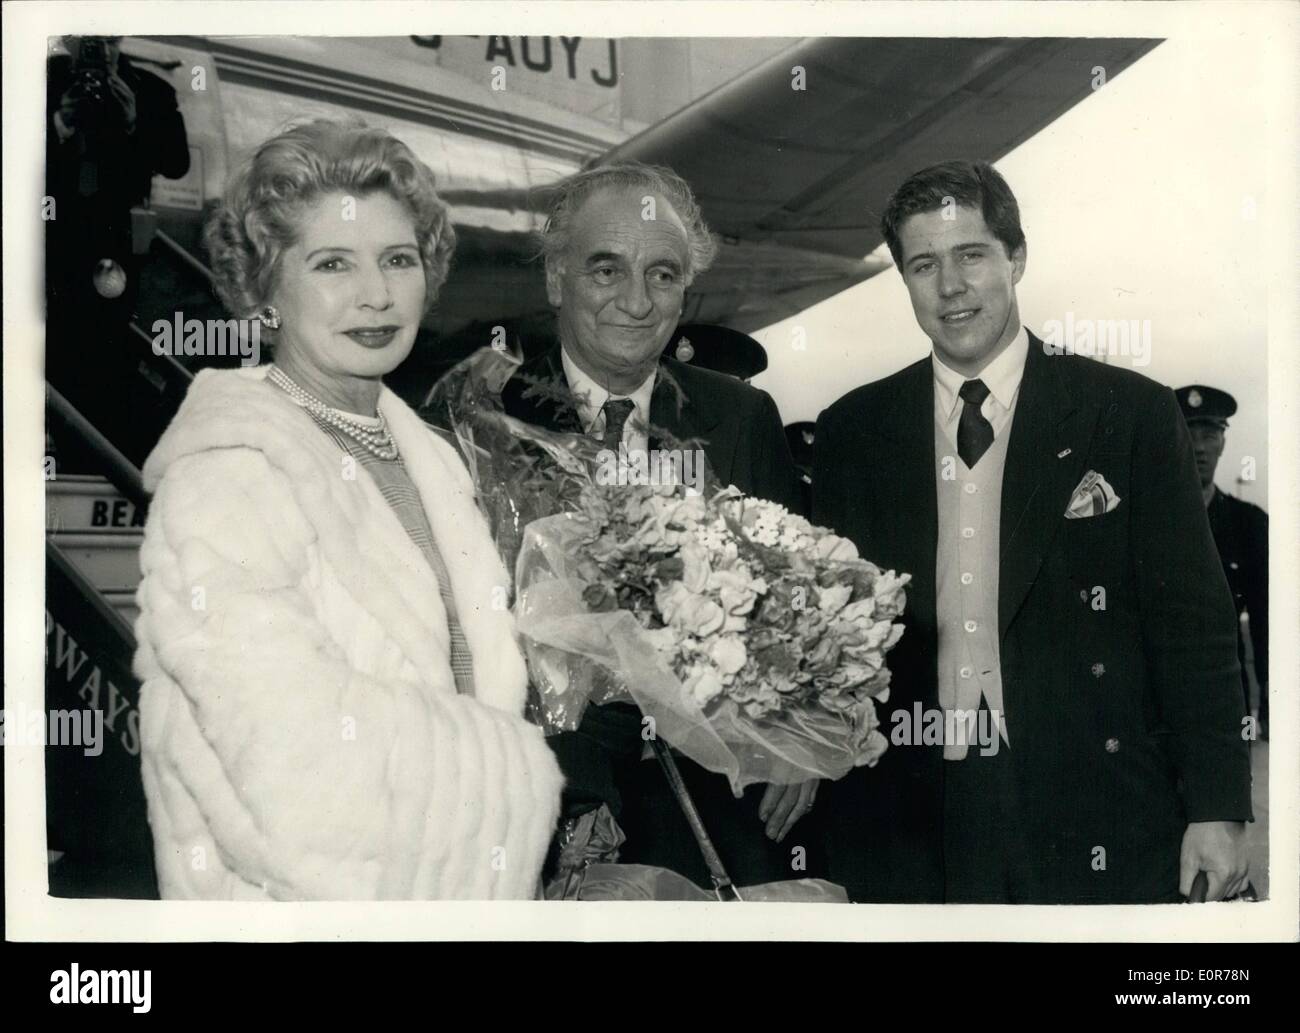 May 05, 1958 - The dockers arrive home from riviera : Sir Bernard and Lady Docker and the latter's son lance arrived at London airport this evening from the french riveirn. The dockers have been expelled from includes Cannes and nice-following an incident in which lady docker is alleged to have destroyed a Monegasque flag. photo shows Sir berlad and lady dockers and lance - on arrival at London airport Thia evening. Stock Photo